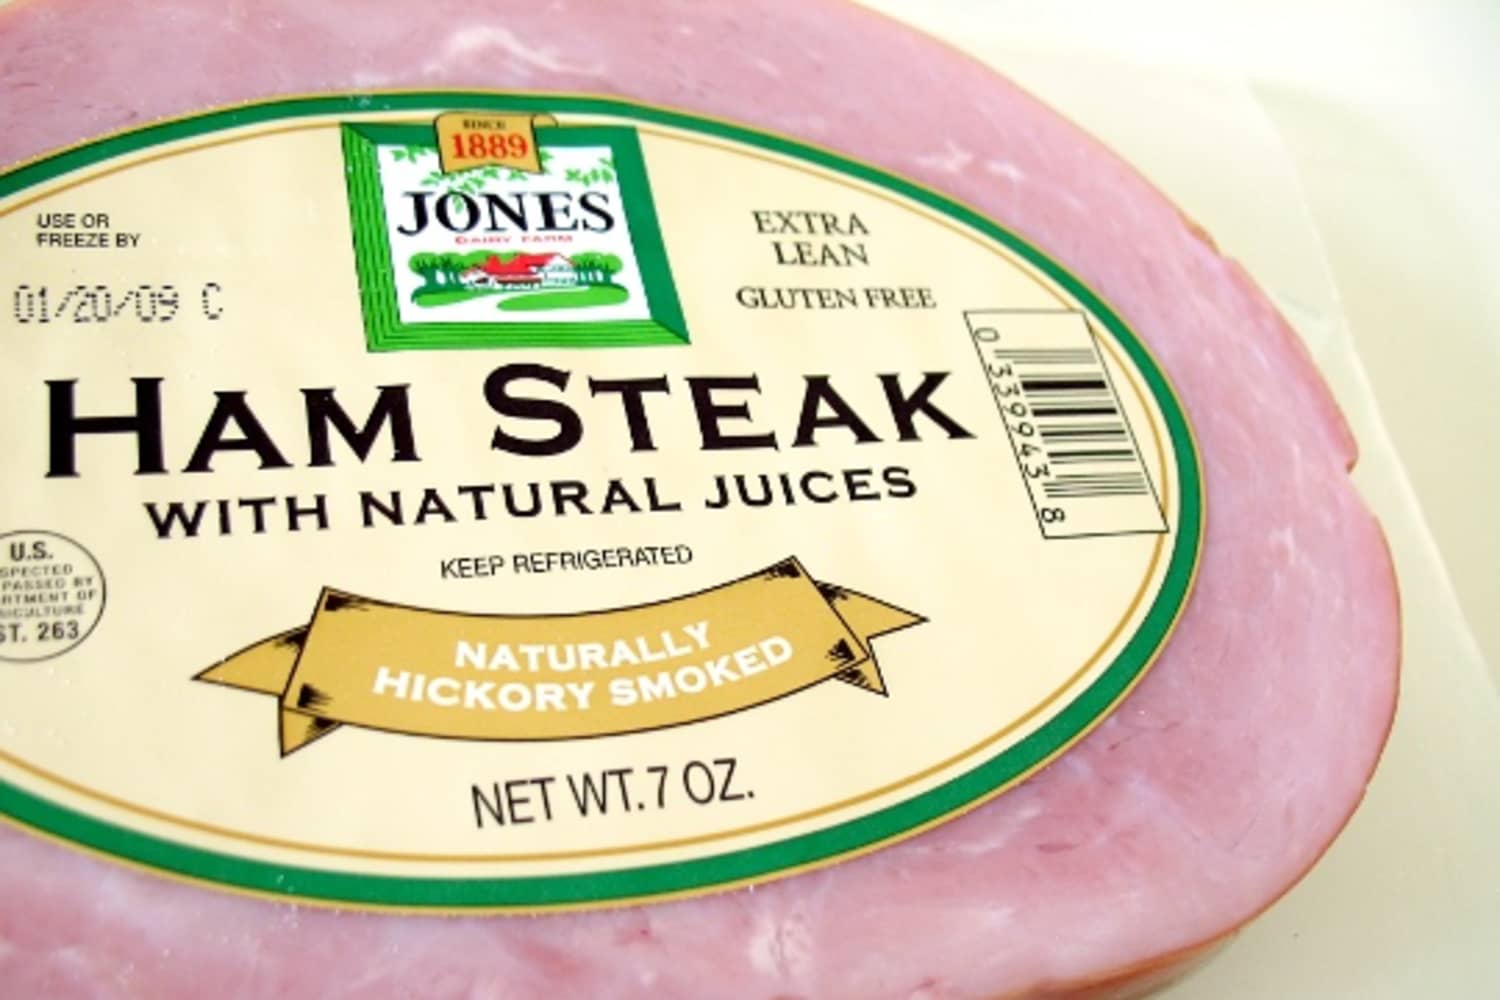 dinners aren’t all that ham steaks are good for…A ham steak is really just ...